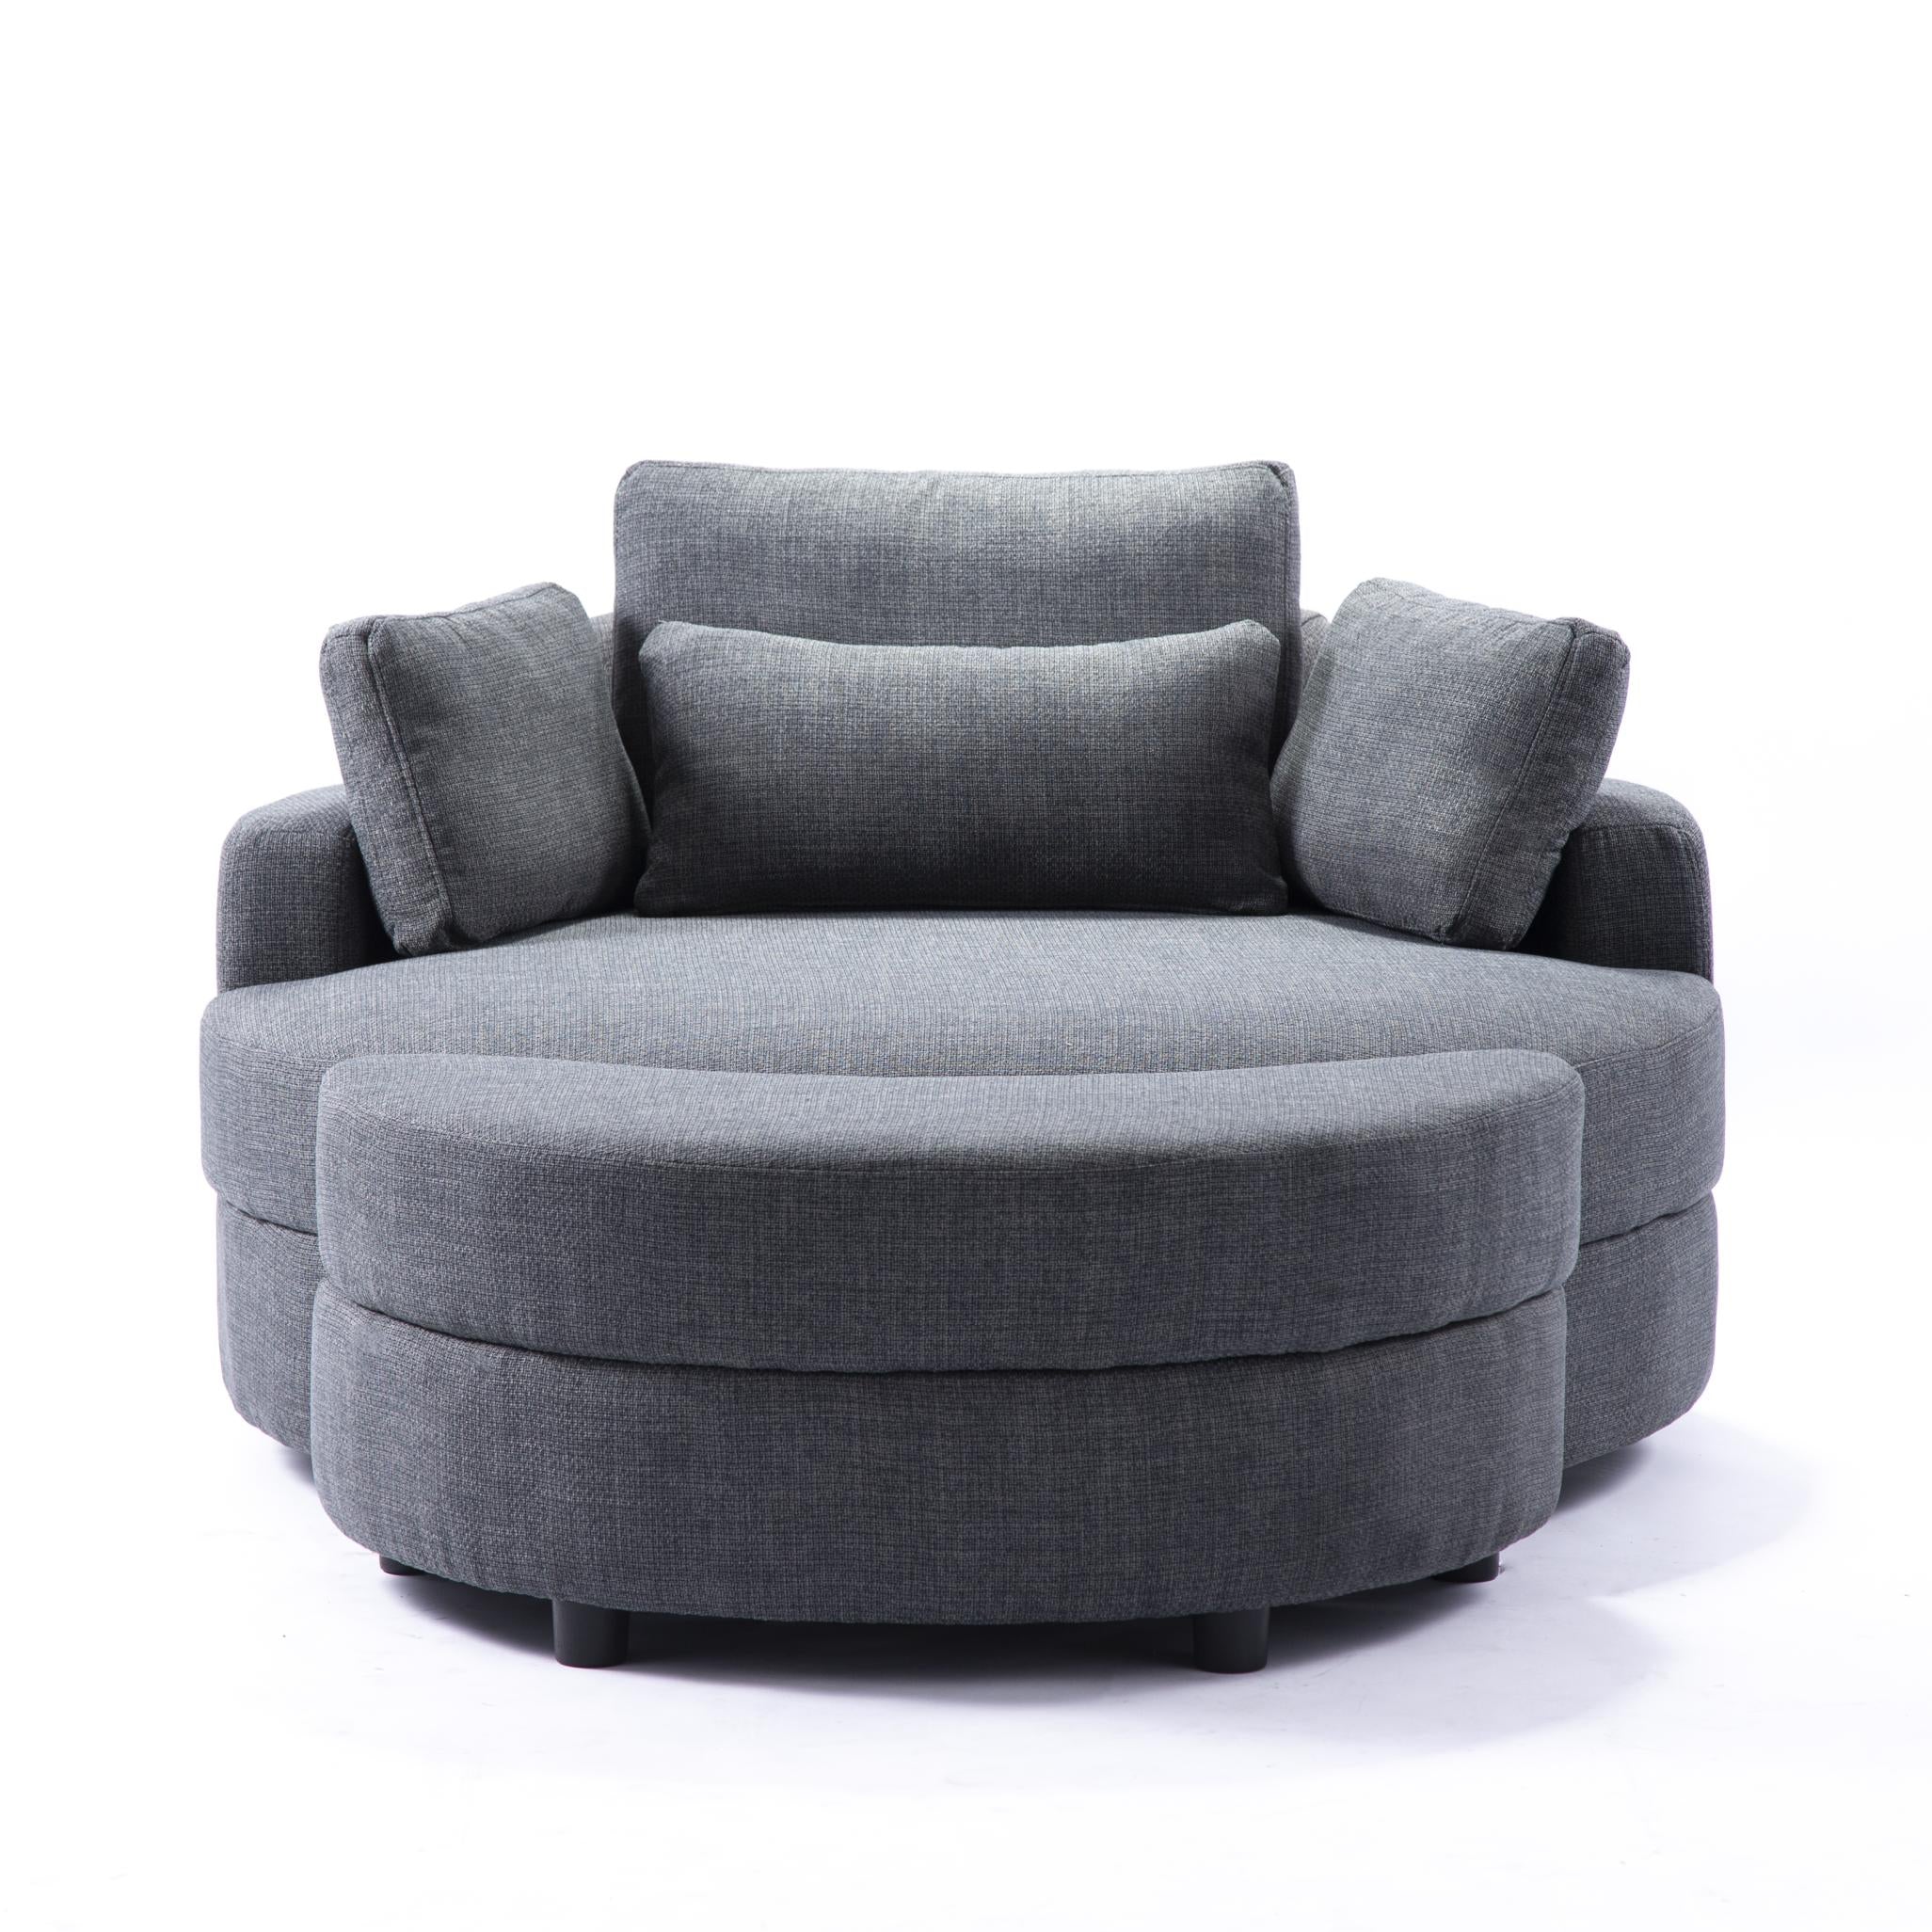 Large round chair with storage linen fabric